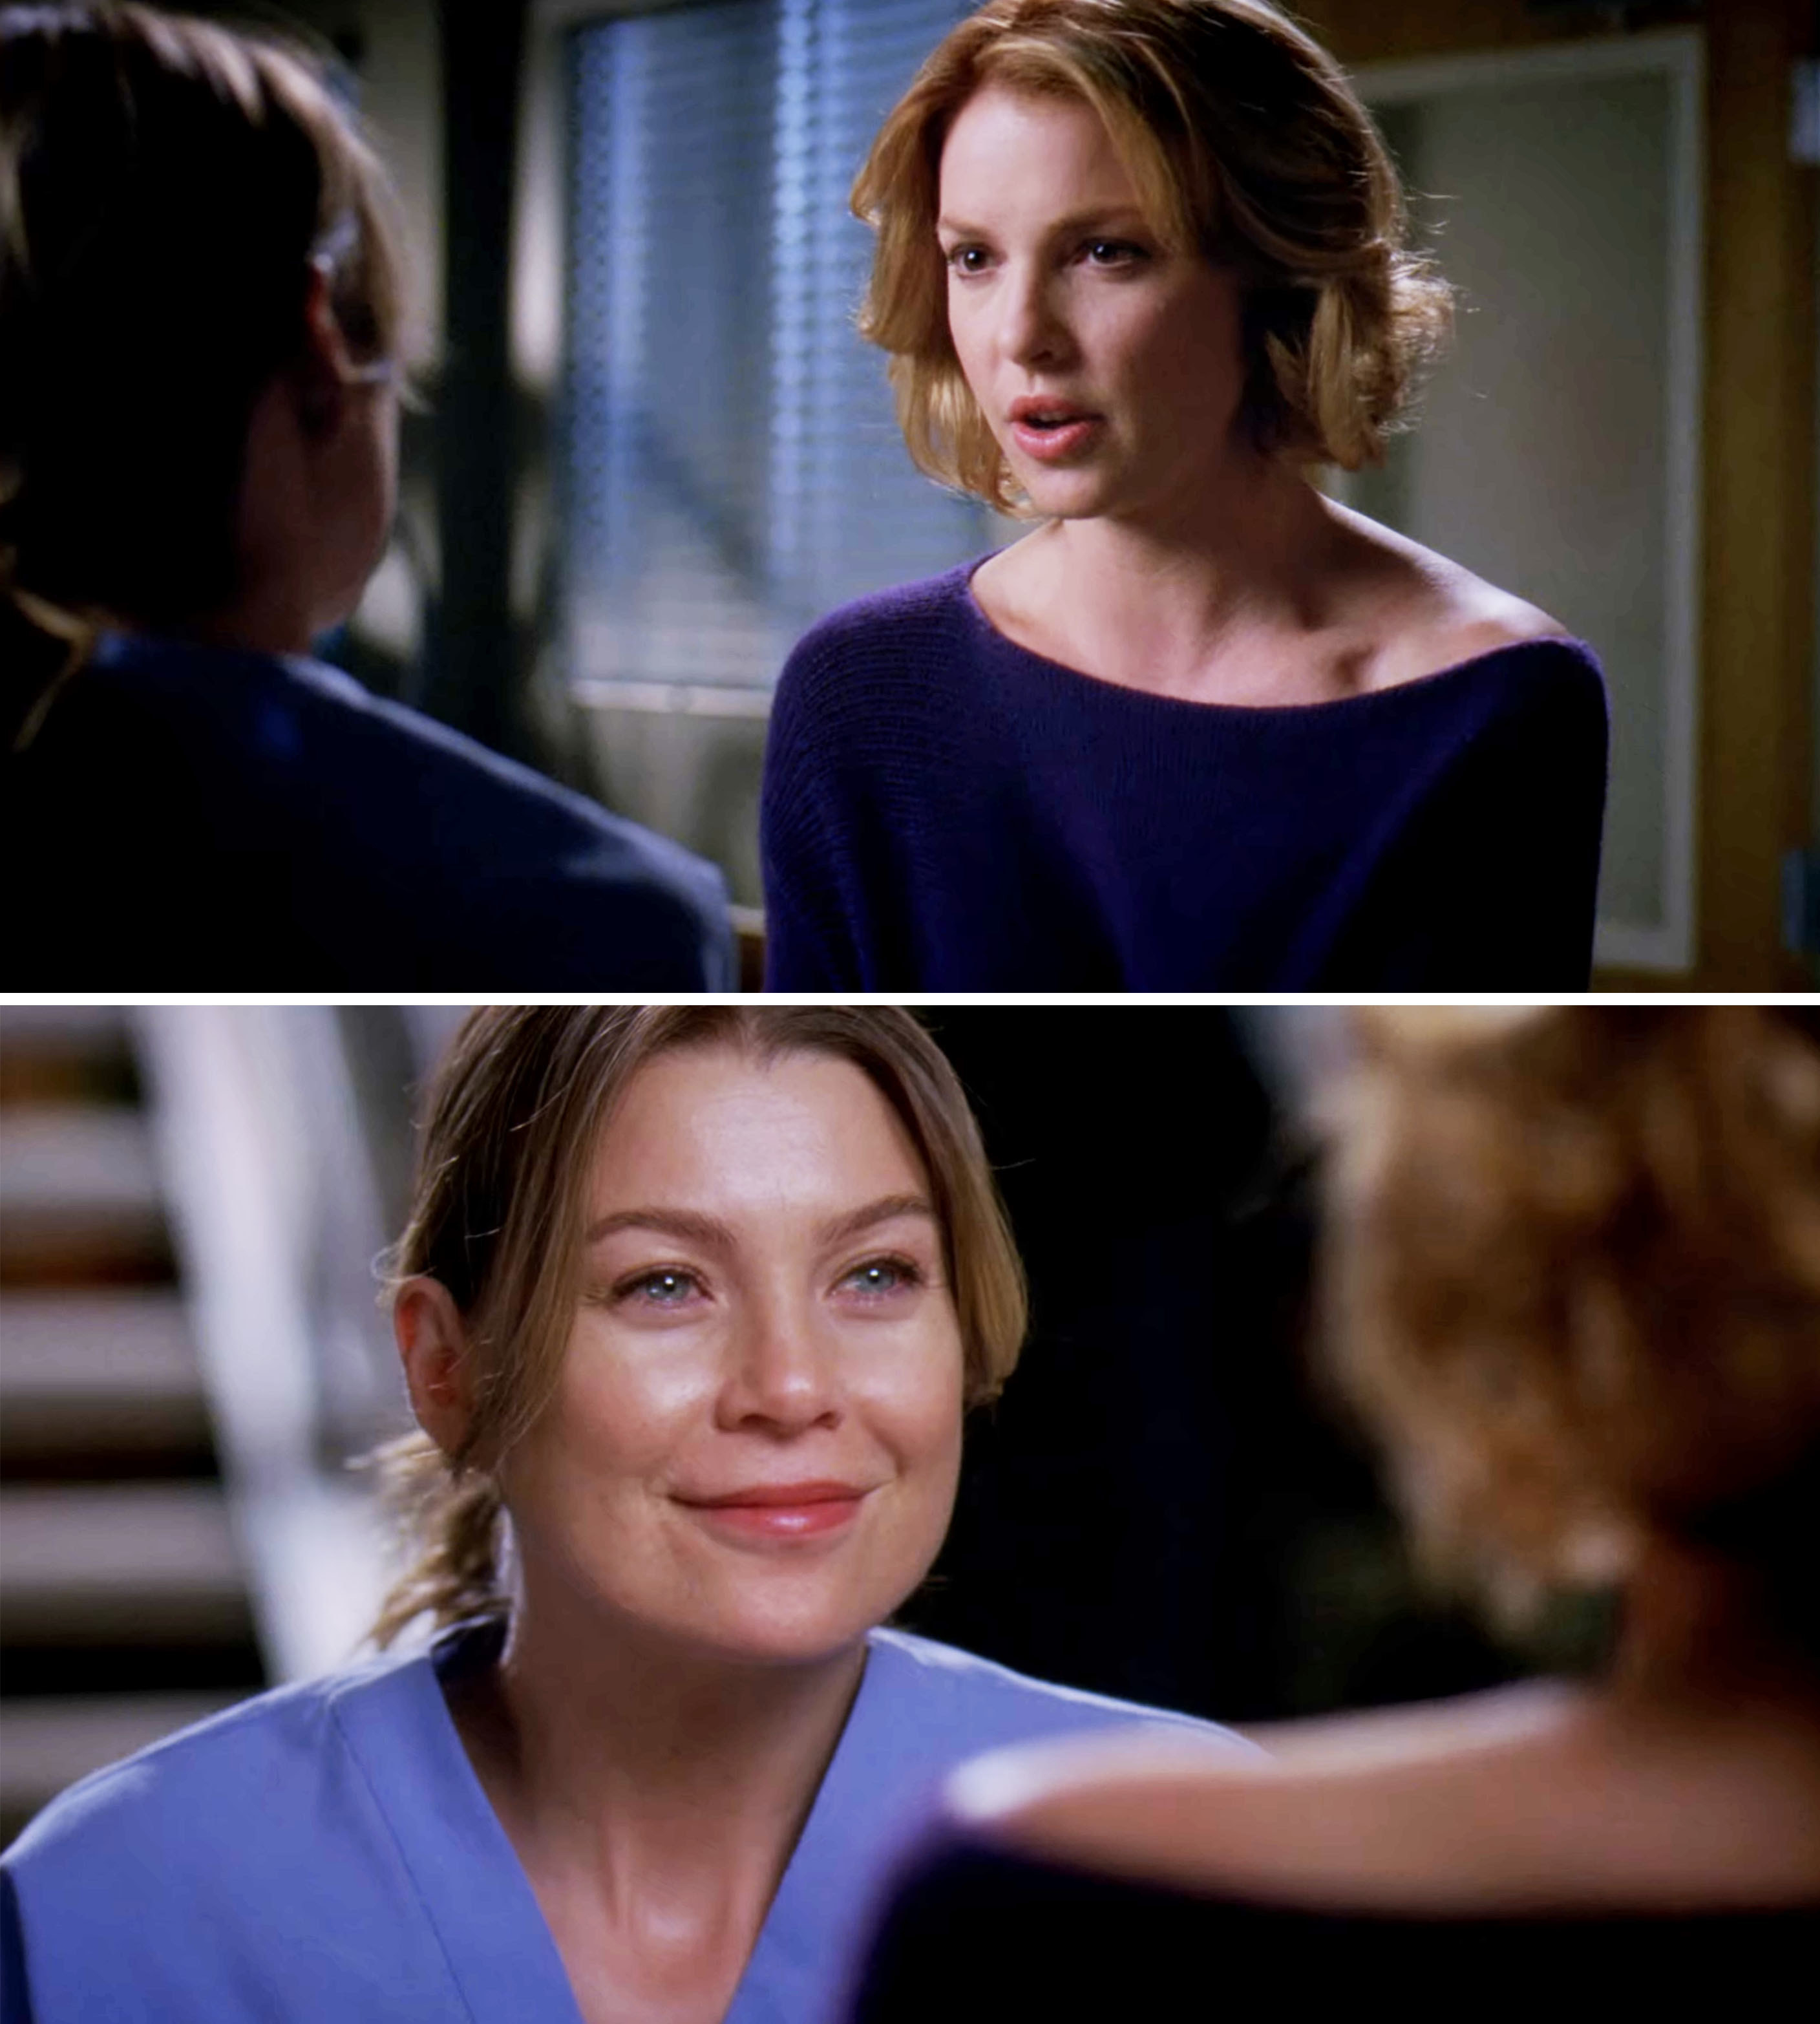 Izzie and Meredith having a conversation